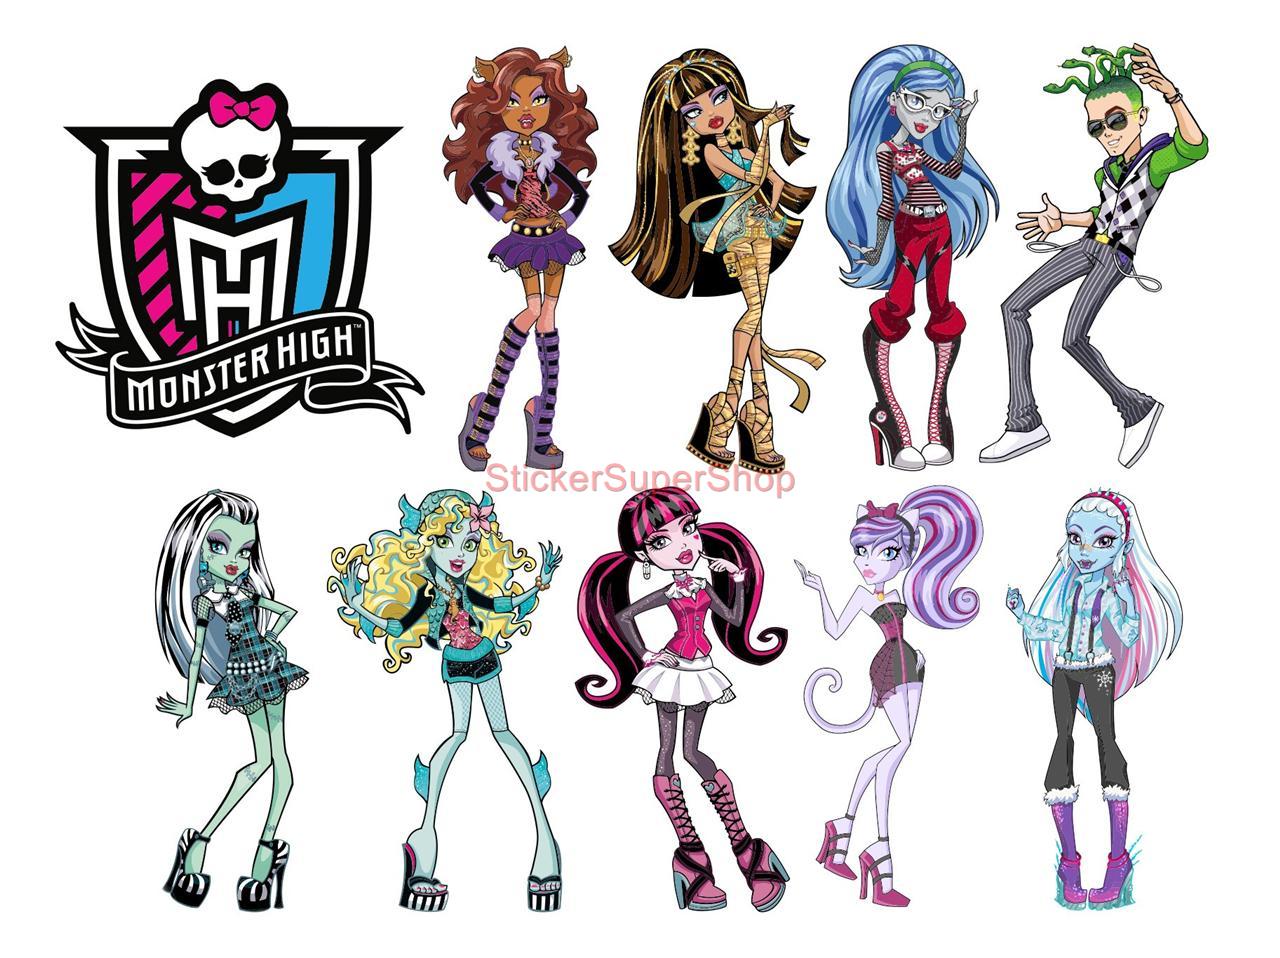 Monster High 9 Characters Logo Decal Removable Wall Sticker Home Decor